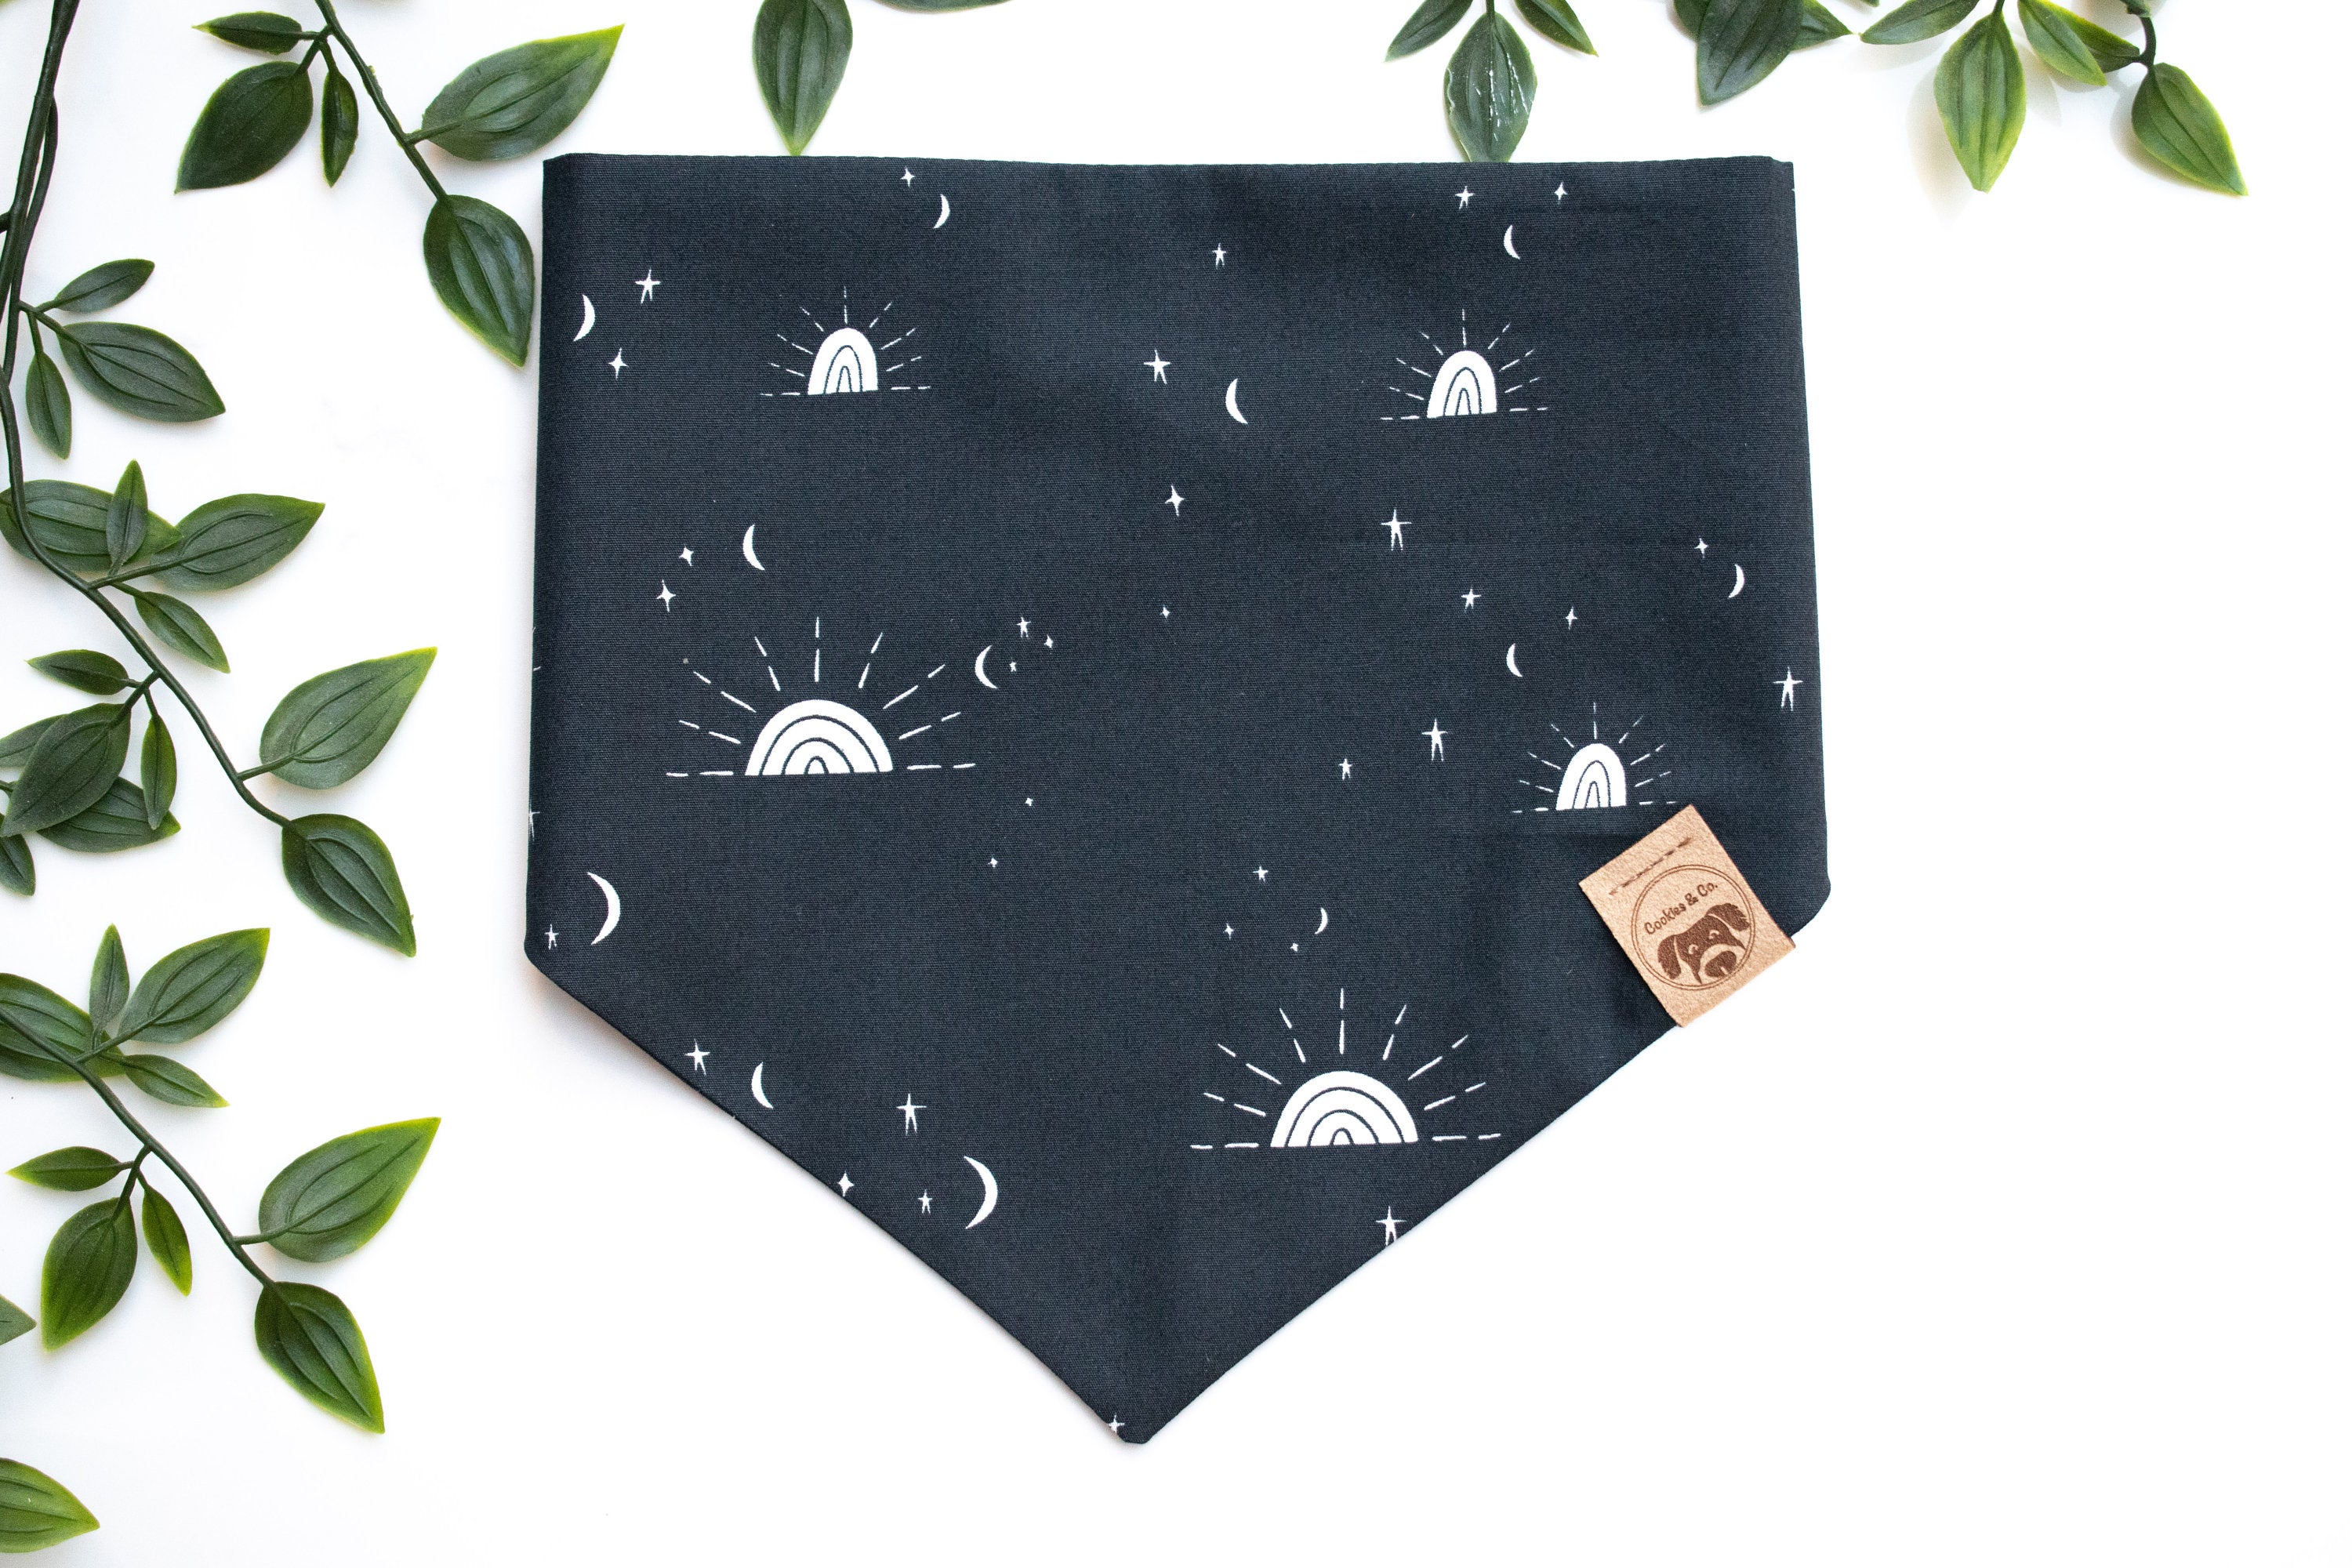 Desert Sunset bandana print, with white sunsets, stars, and moons in different sizes on a black background